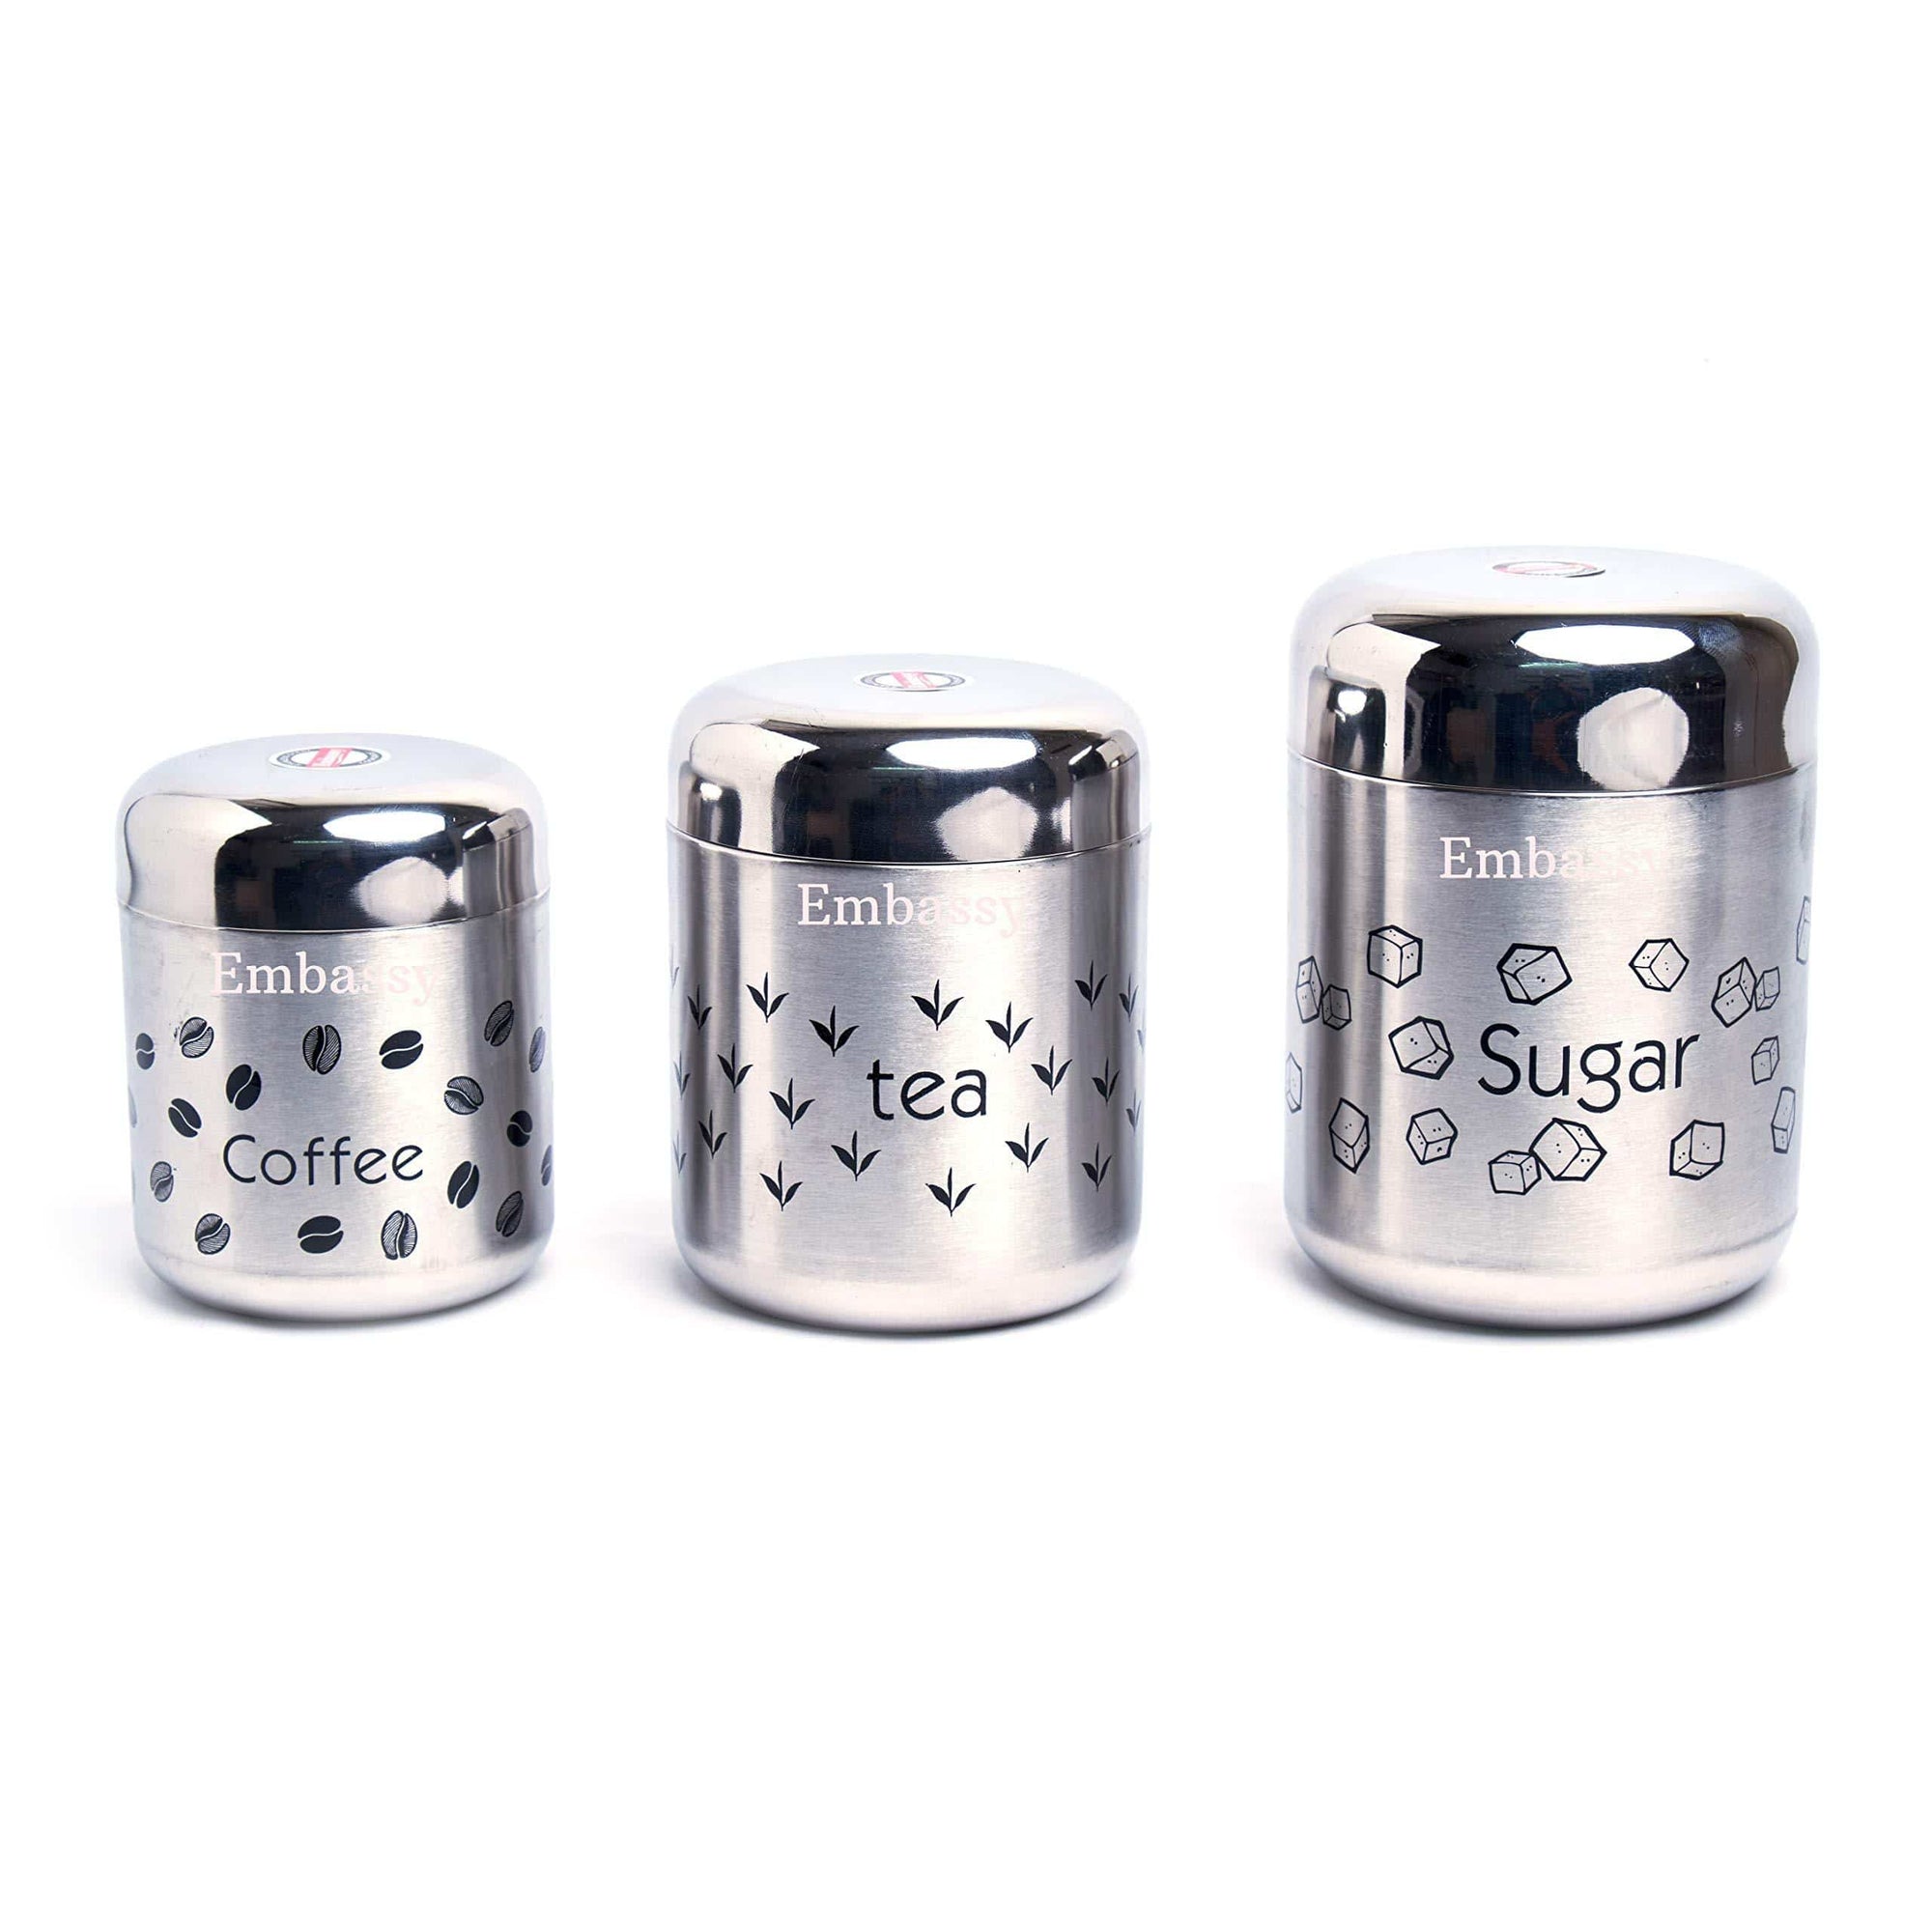 Embassy Stainless Steel Vintage Tea Coffee Sugar Canisters, Set of 3; Approximate Capacity: Tea - 700 ml, Coffee - 500 ml, Sugar - 900 ml - KITCHEN MART